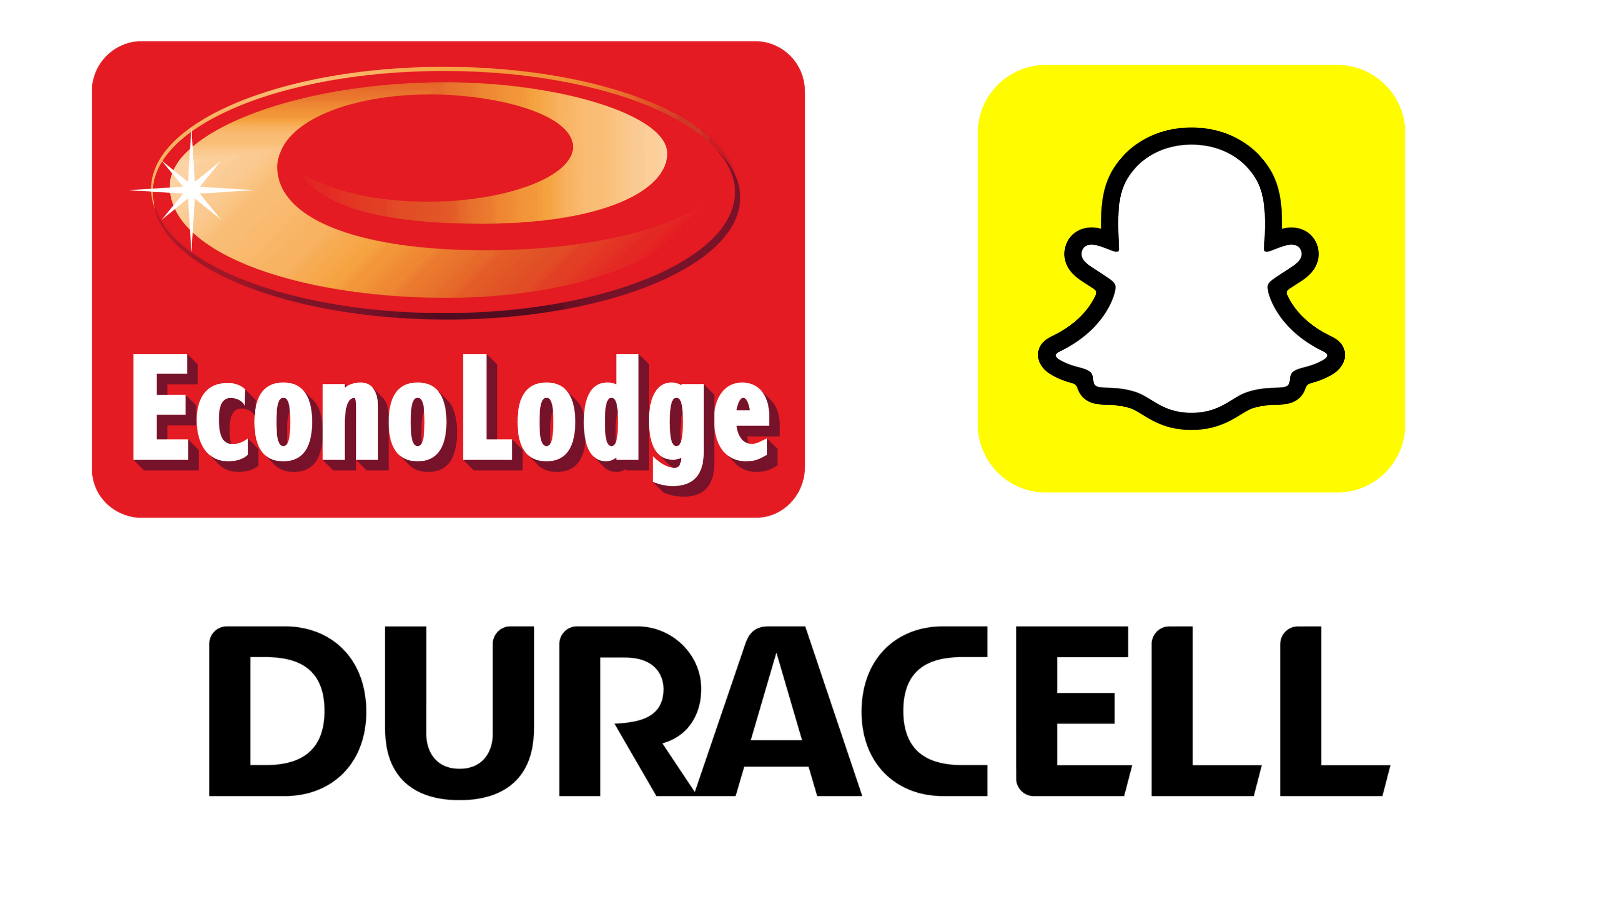 The logos for EconoLodge, Snapchat, and Duracell